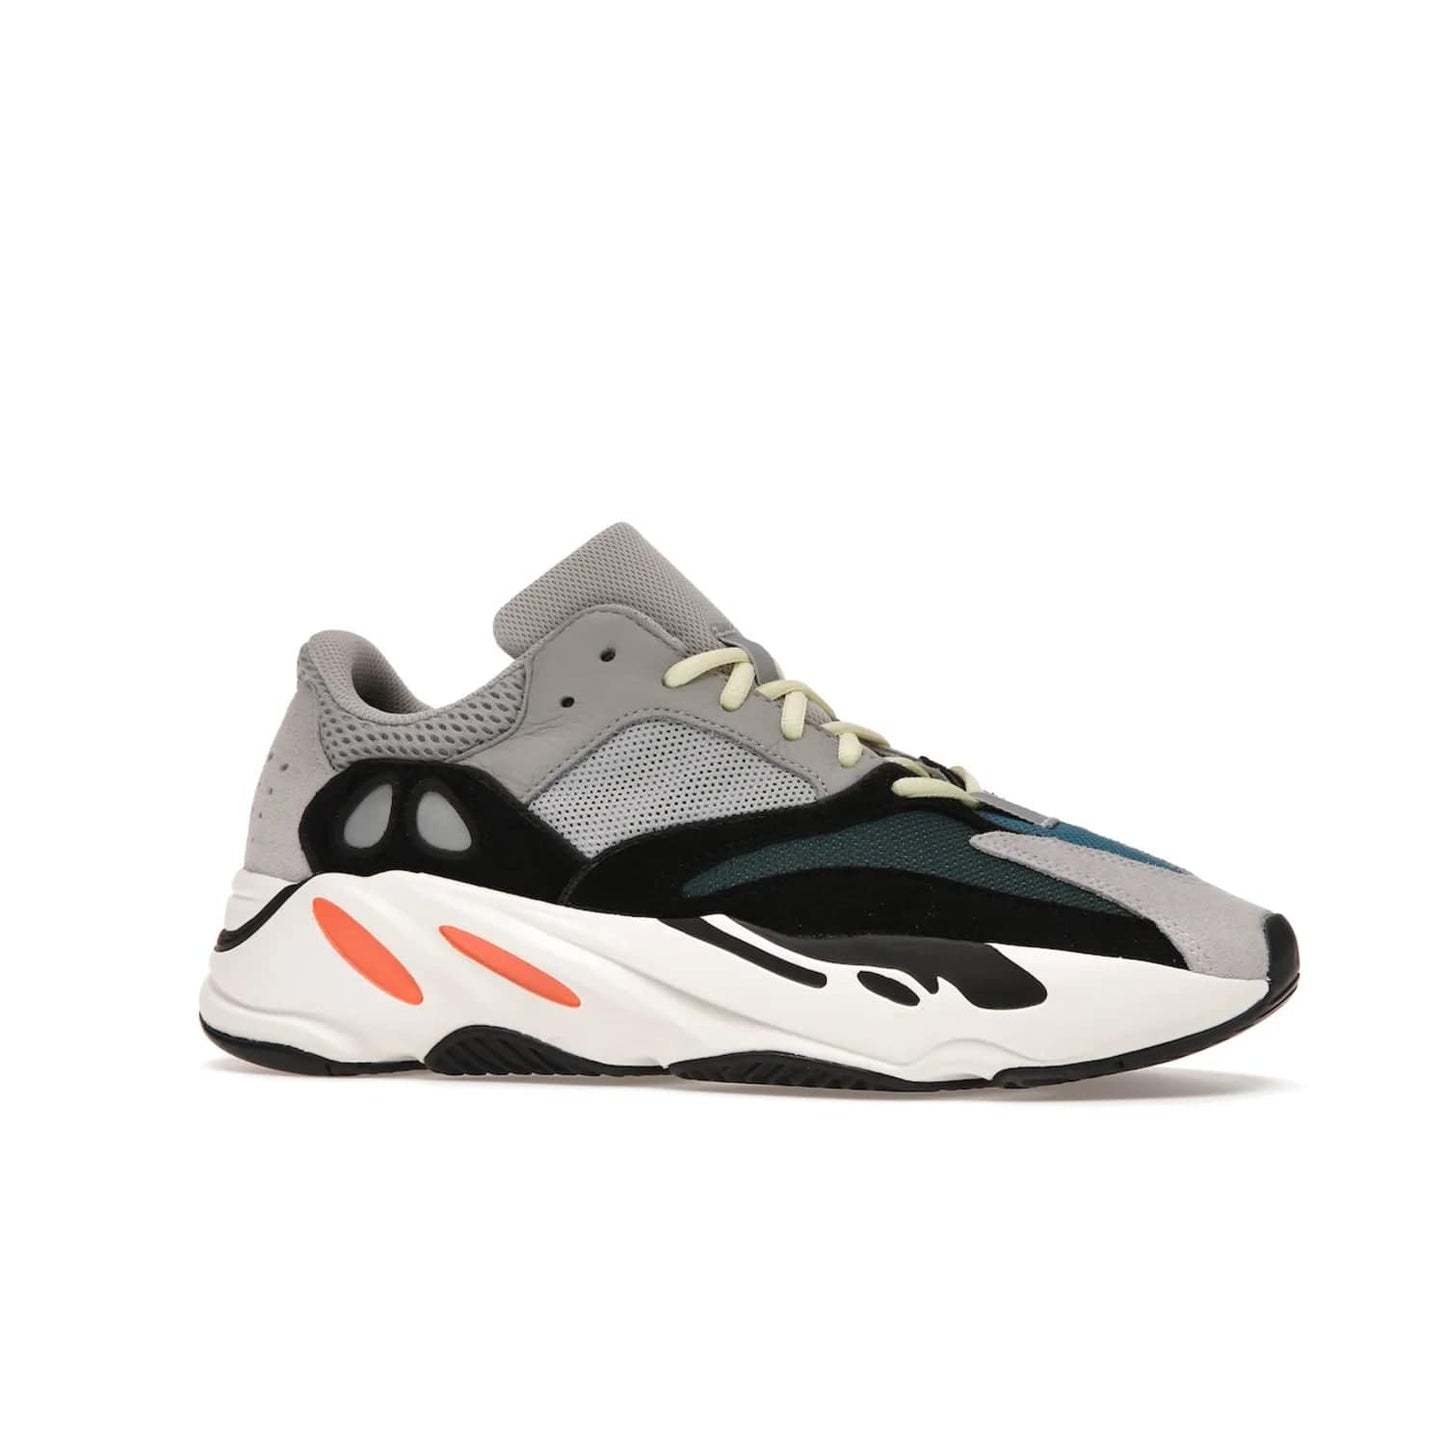 adidas Yeezy Boost 700 Wave Runner - Image 3 - Only at www.BallersClubKickz.com - Shop the iconic adidas Yeezy Boost 700 Wave Runner. Featuring grey mesh and leather upper, black suede overlays, teal mesh underlays, and signature Boost sole. Be bold & make a statement.